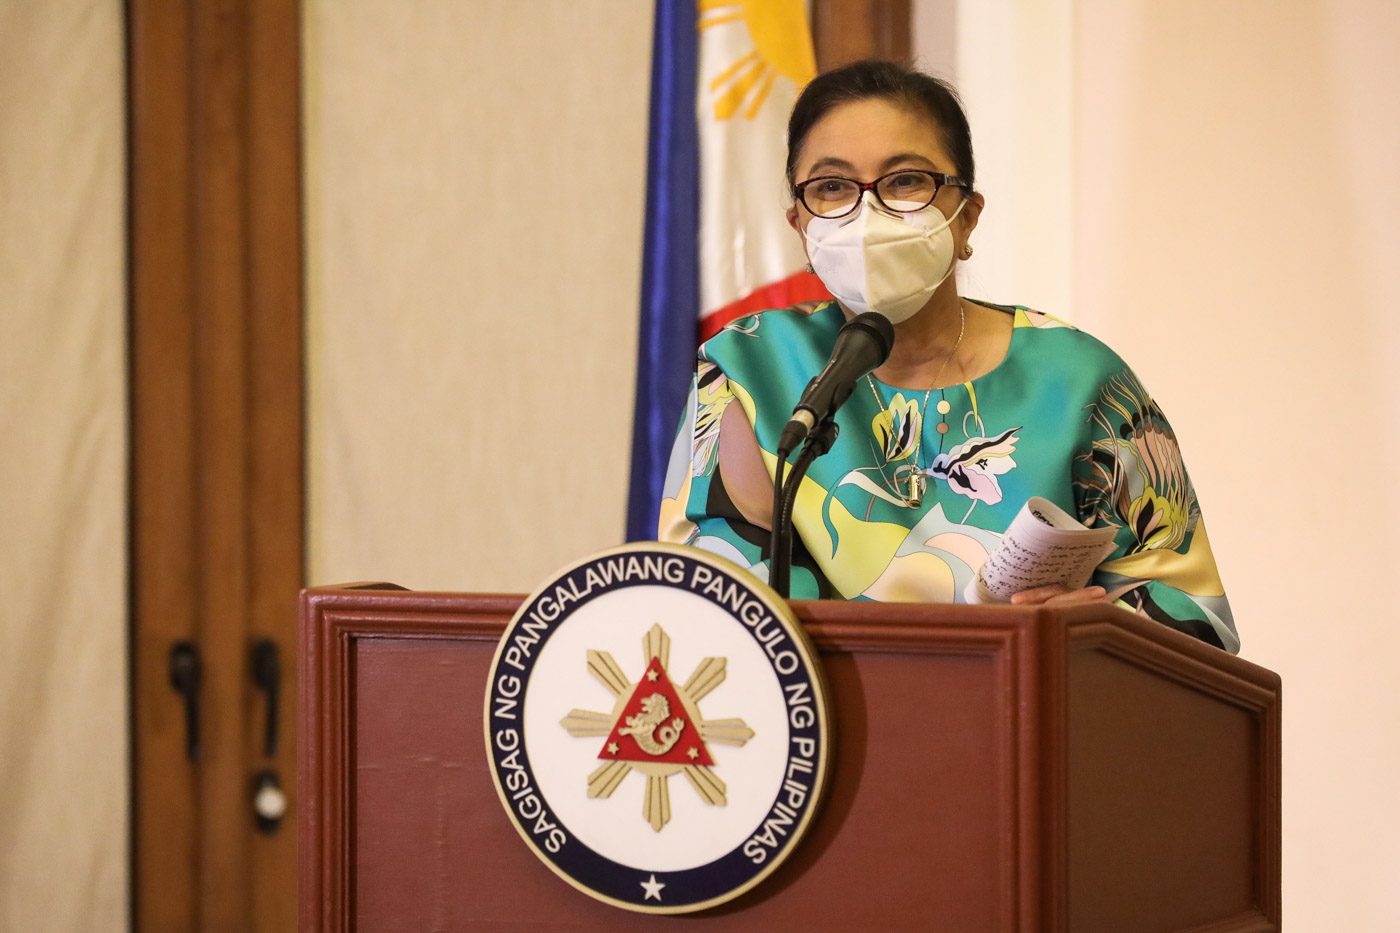 WATCH: Robredo’s 2022 priorities: Pandemic control, economy, education, social services